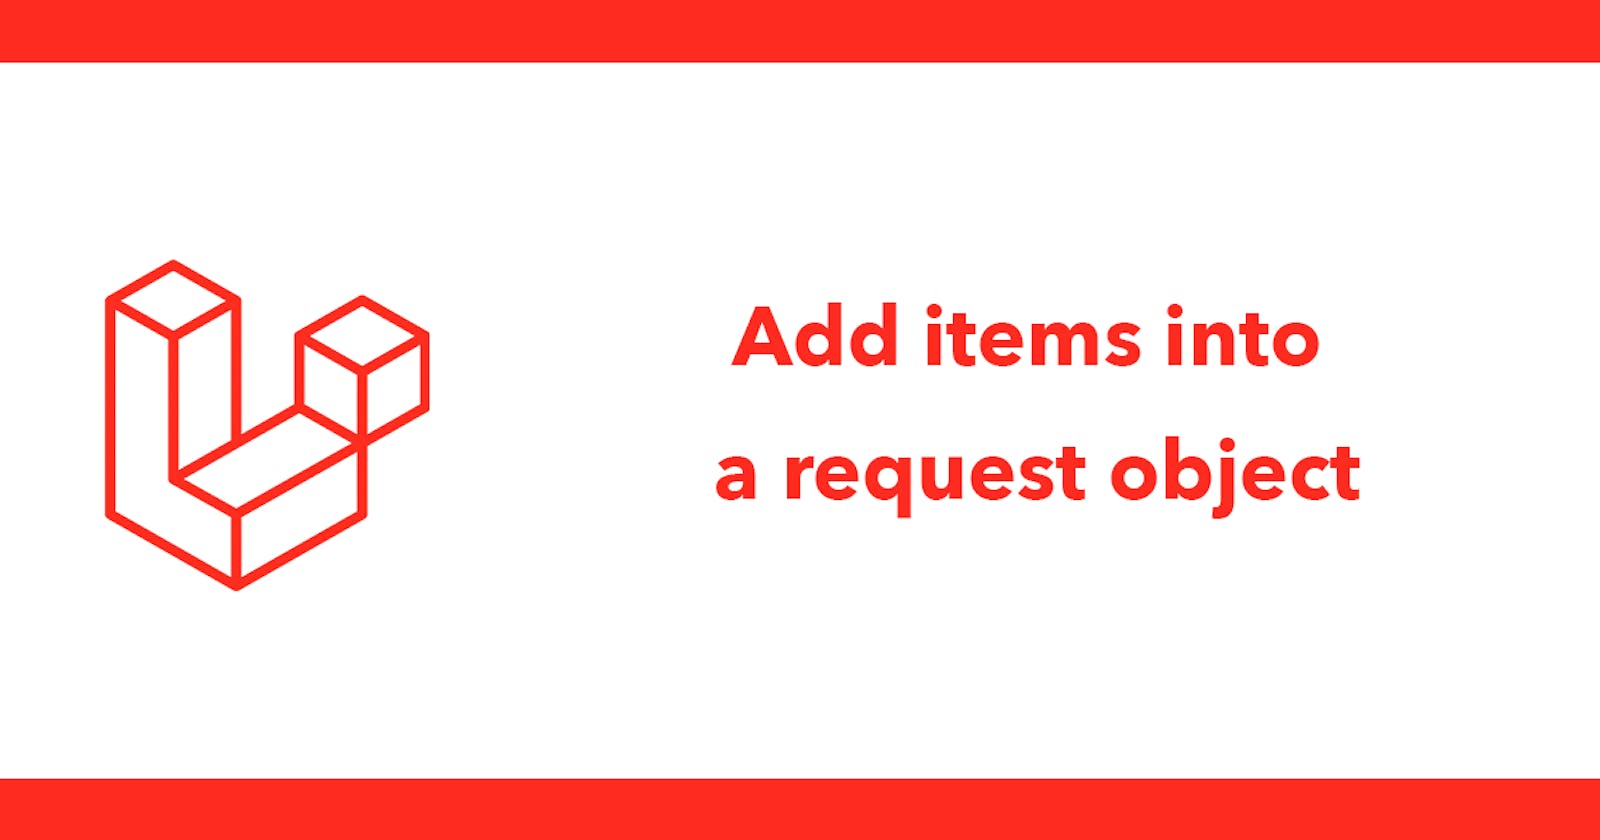 Add items into a request object